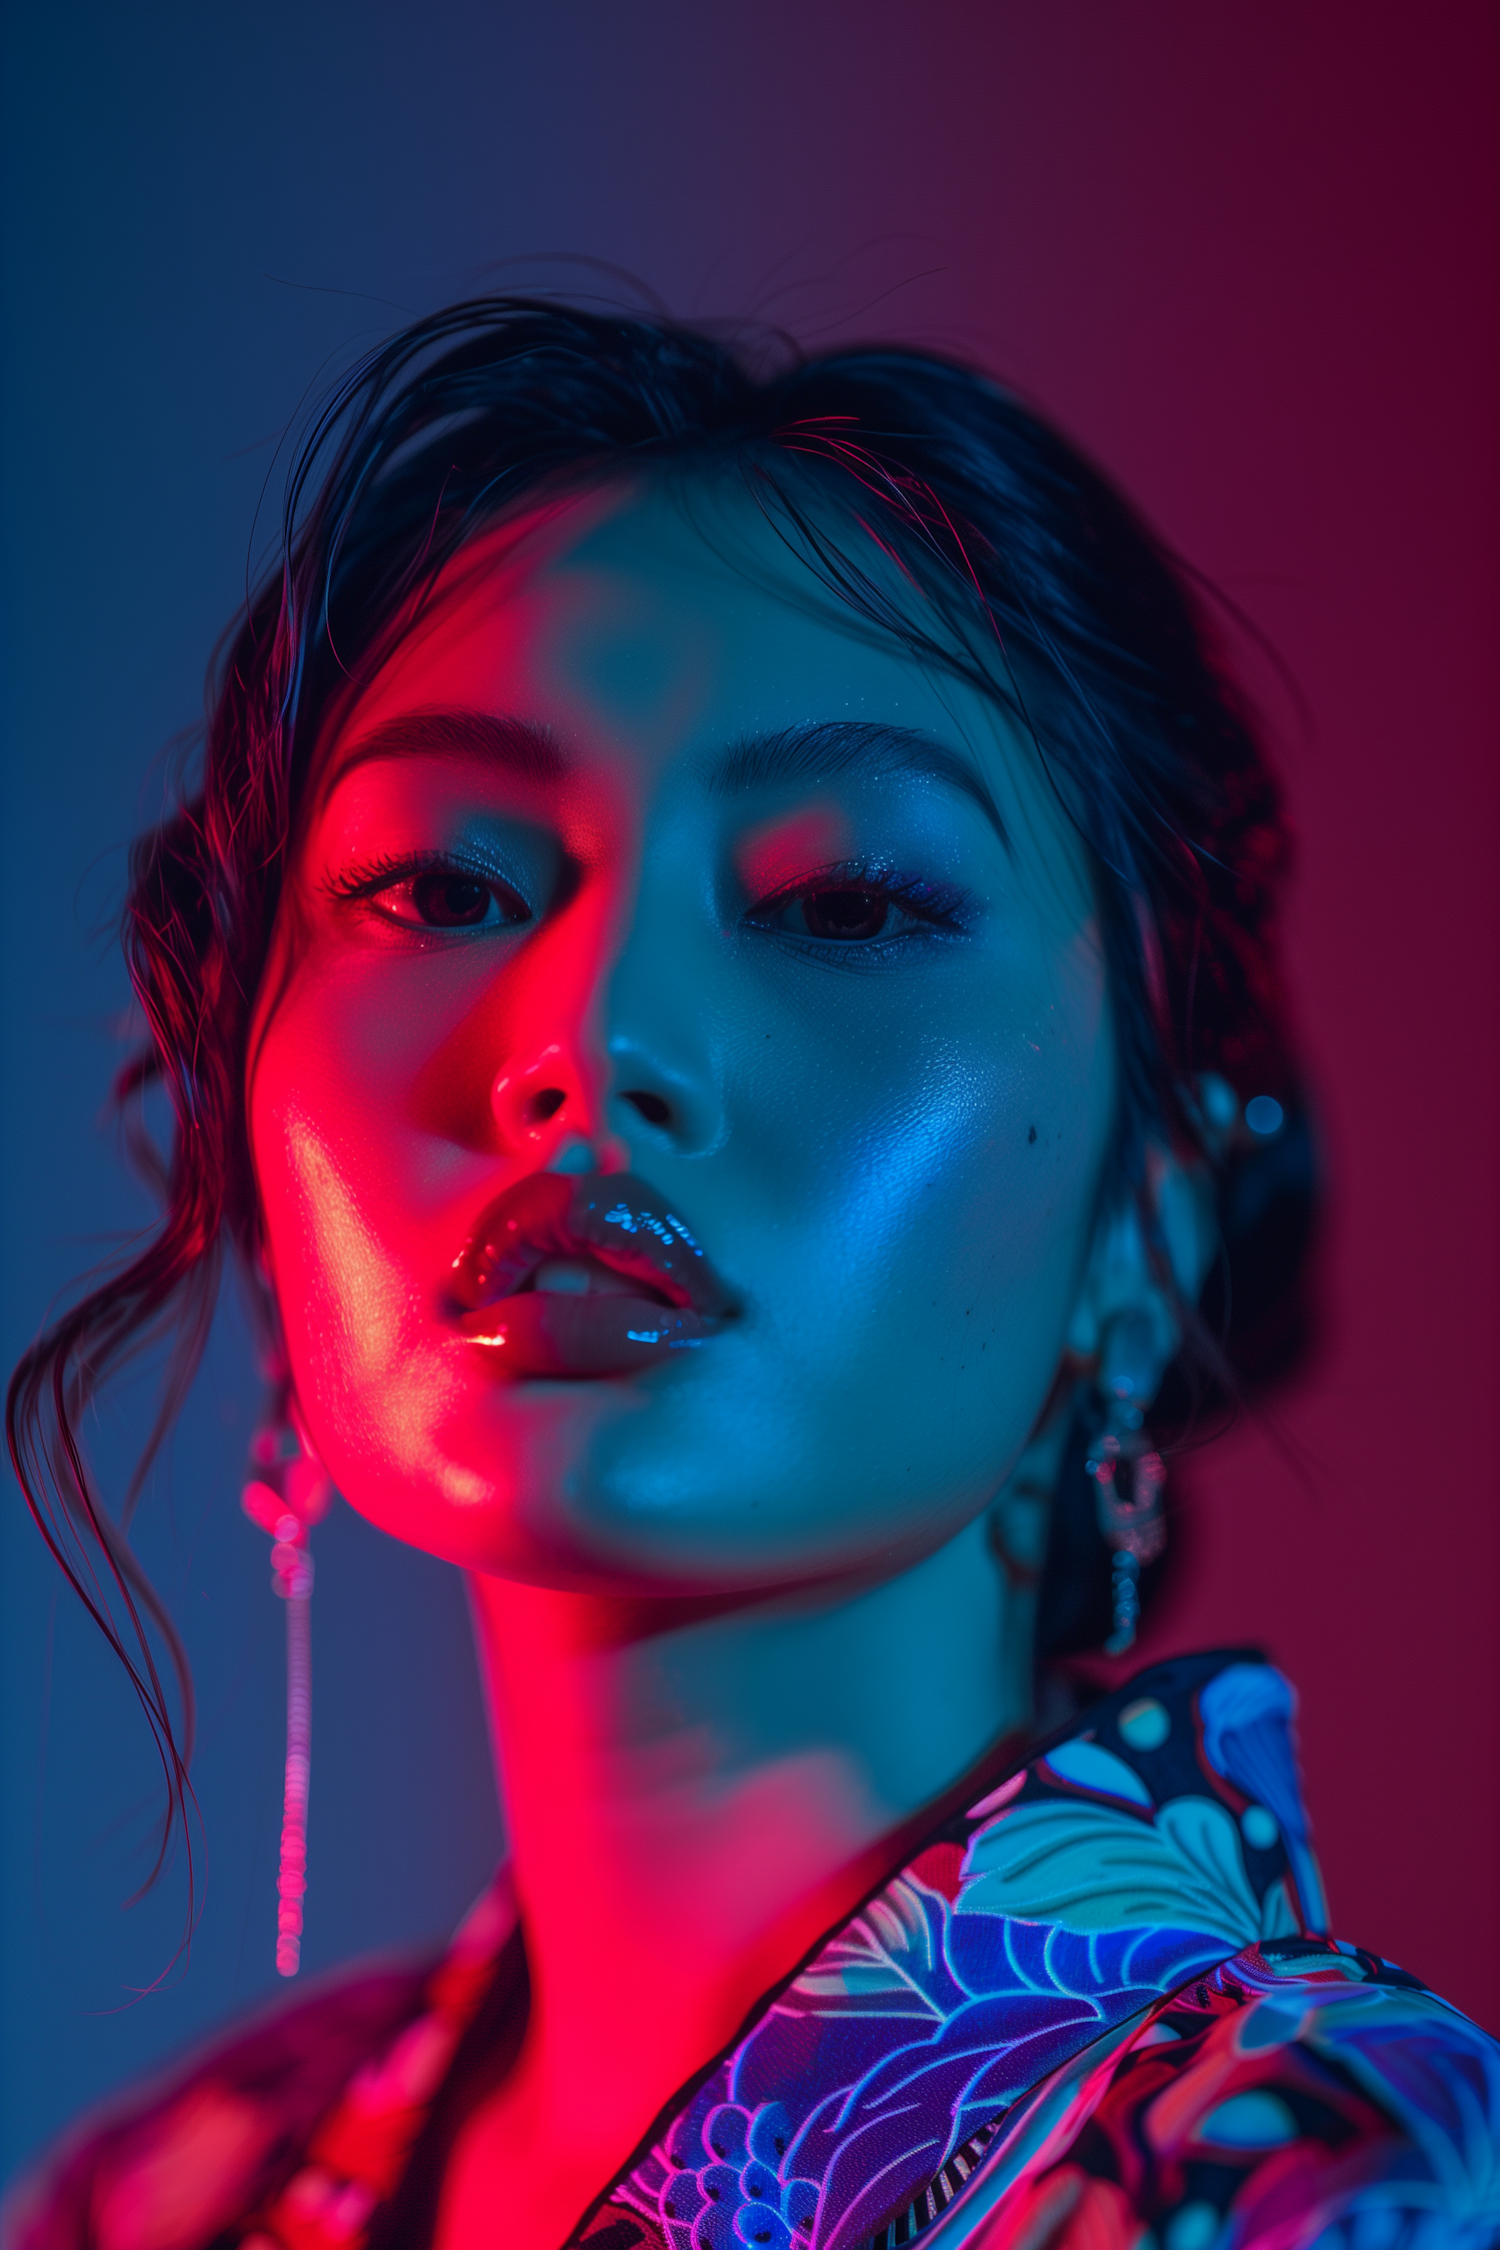 Striking Portrait of Woman in Pink and Blue Lighting